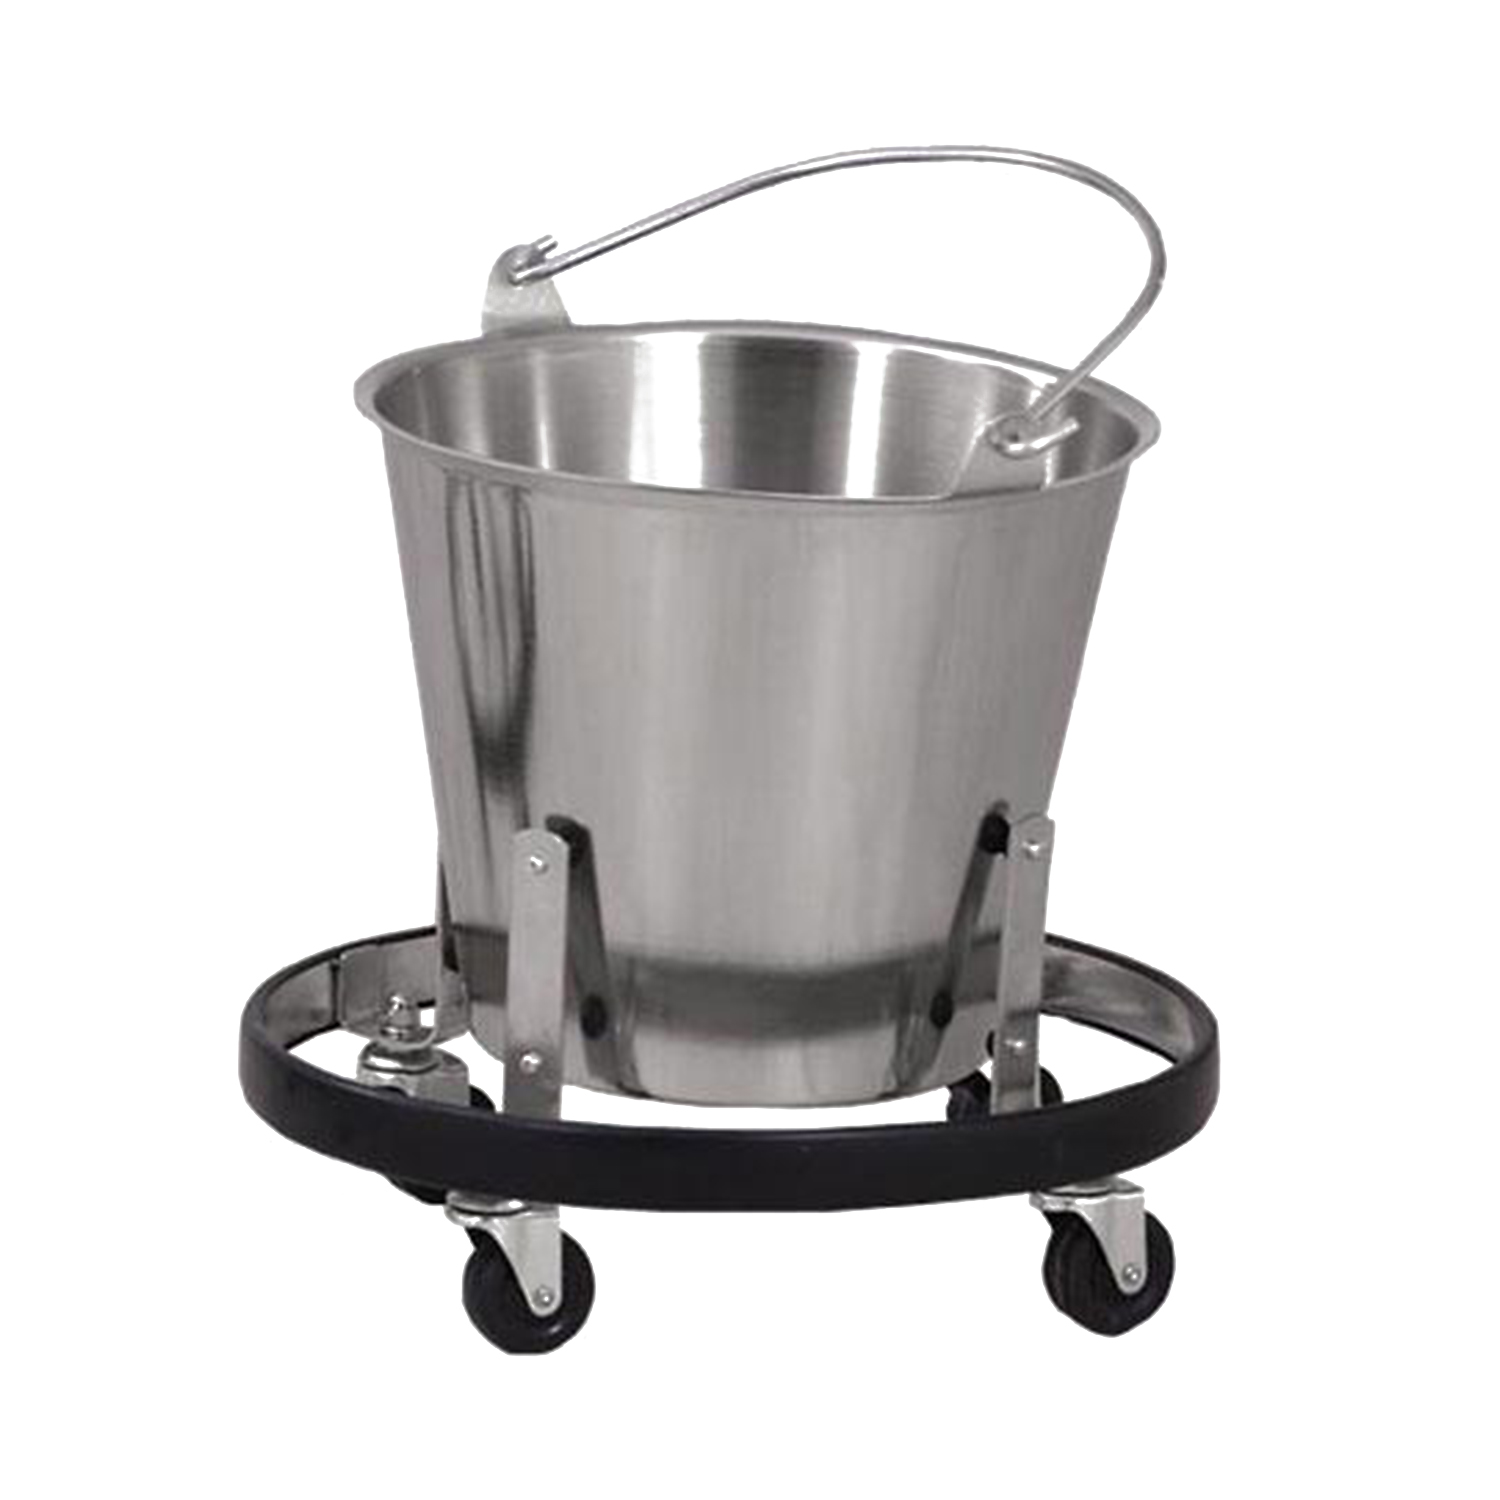 Medical Kick Bucket and Frame- Stainless Steel